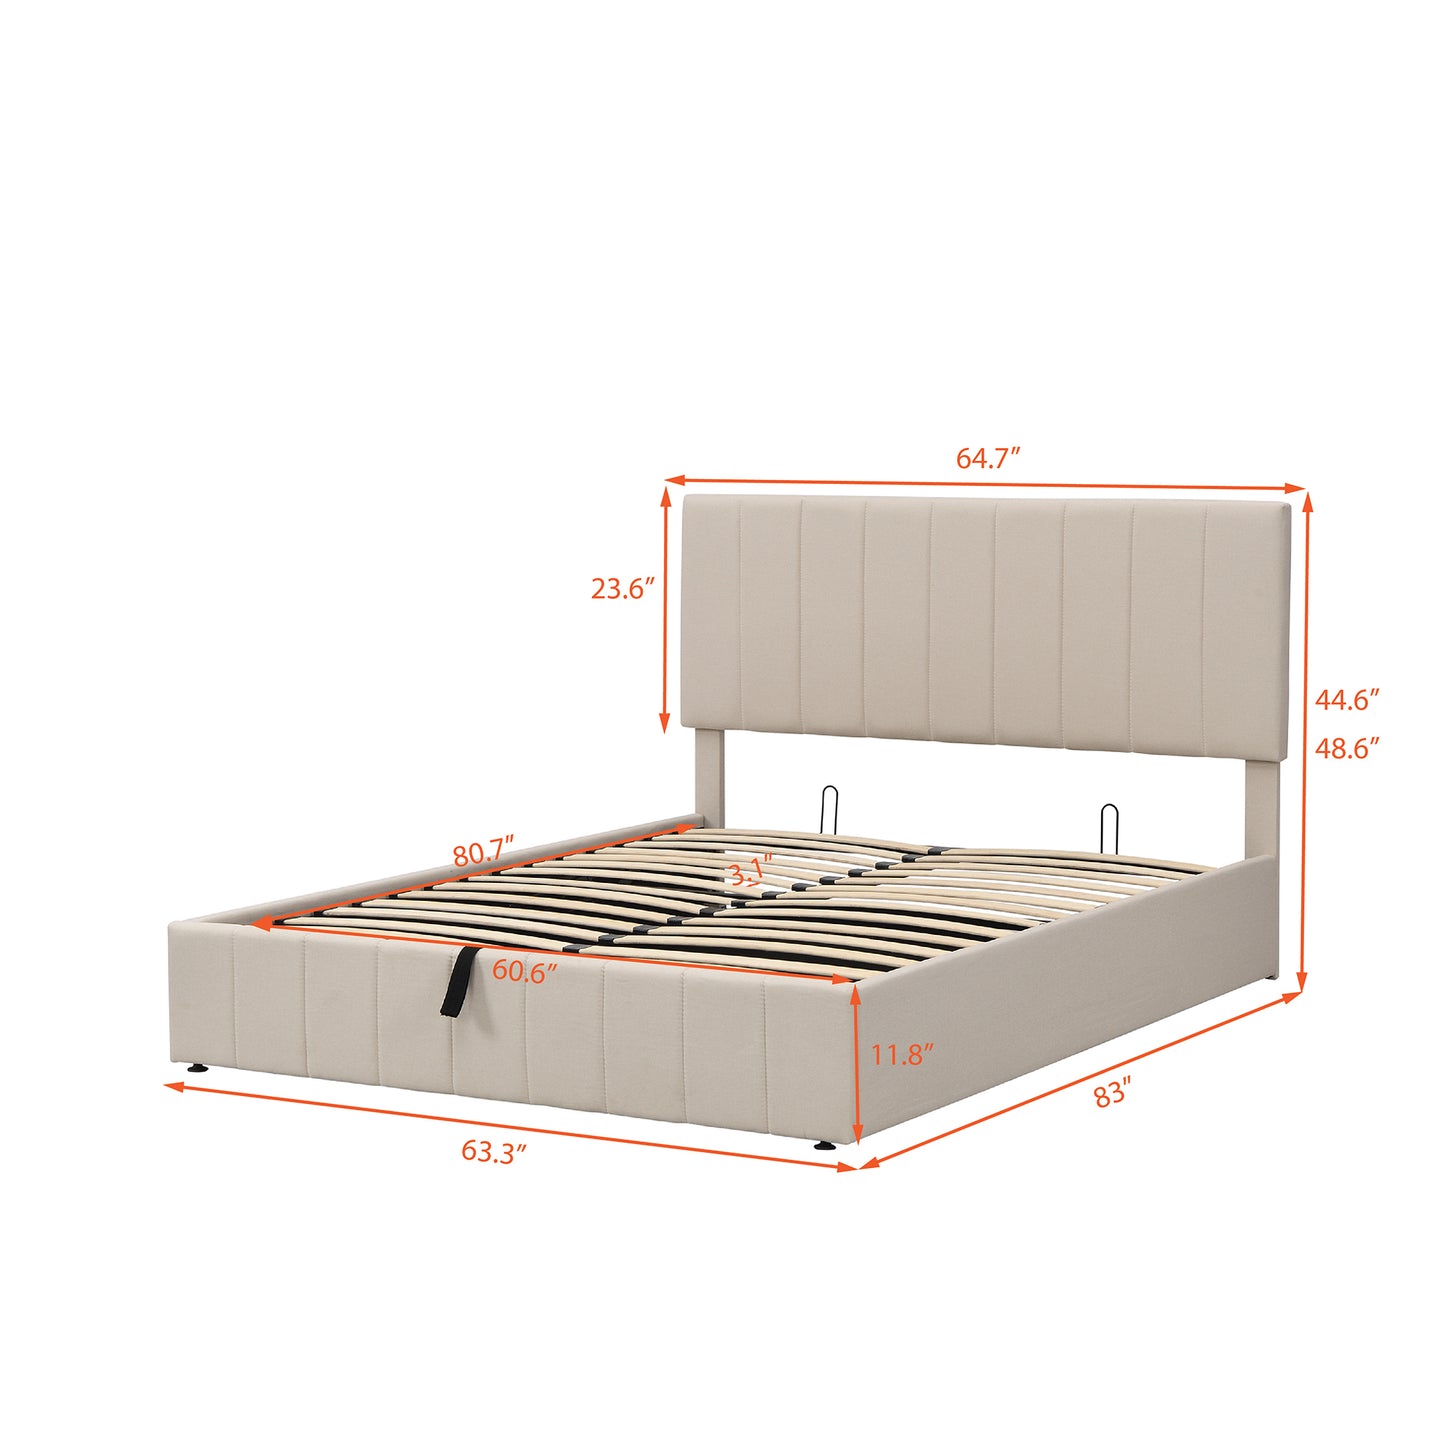 Queen size Upholstered Platform bed with a Hydraulic Storage System - Beige